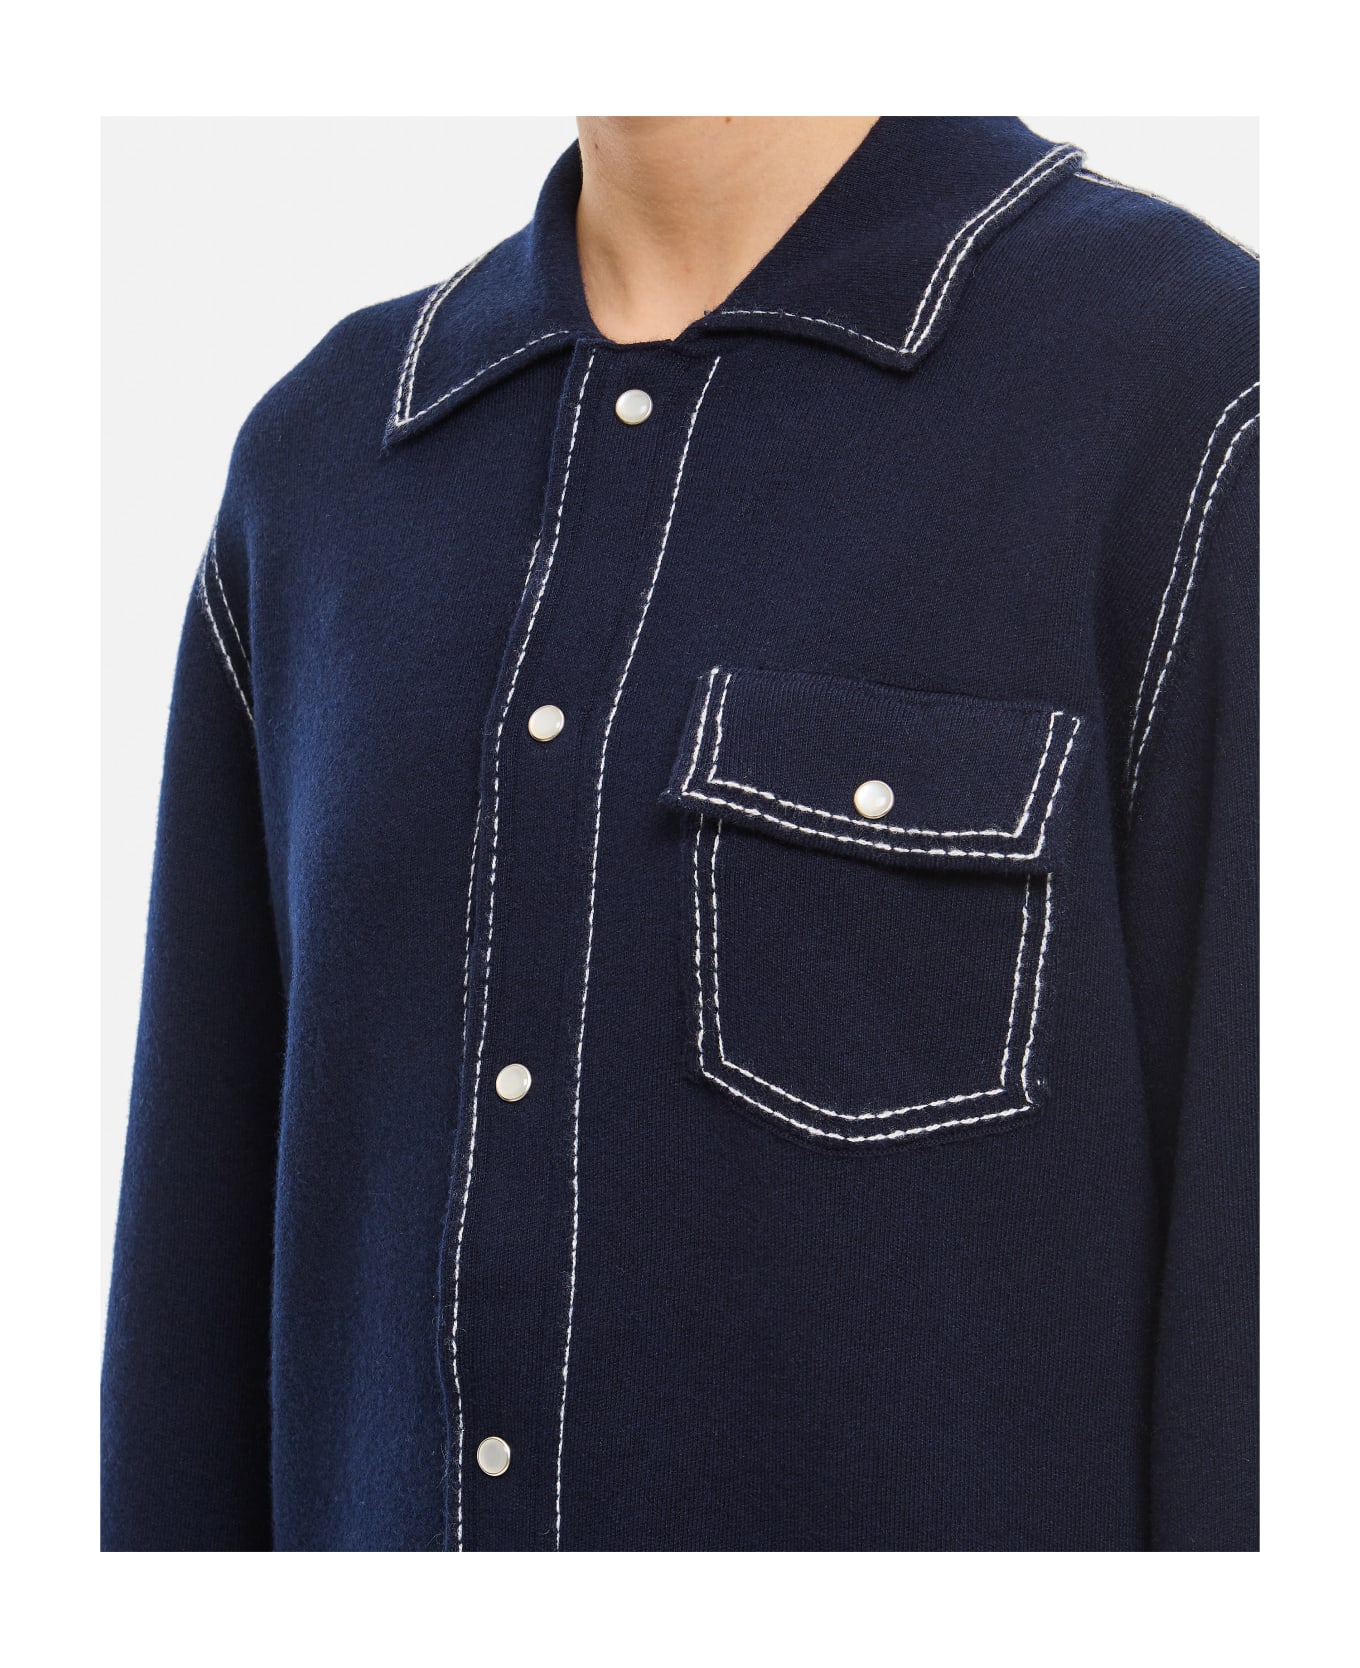 Barrie Cashmere Overshirt - Black シャツ